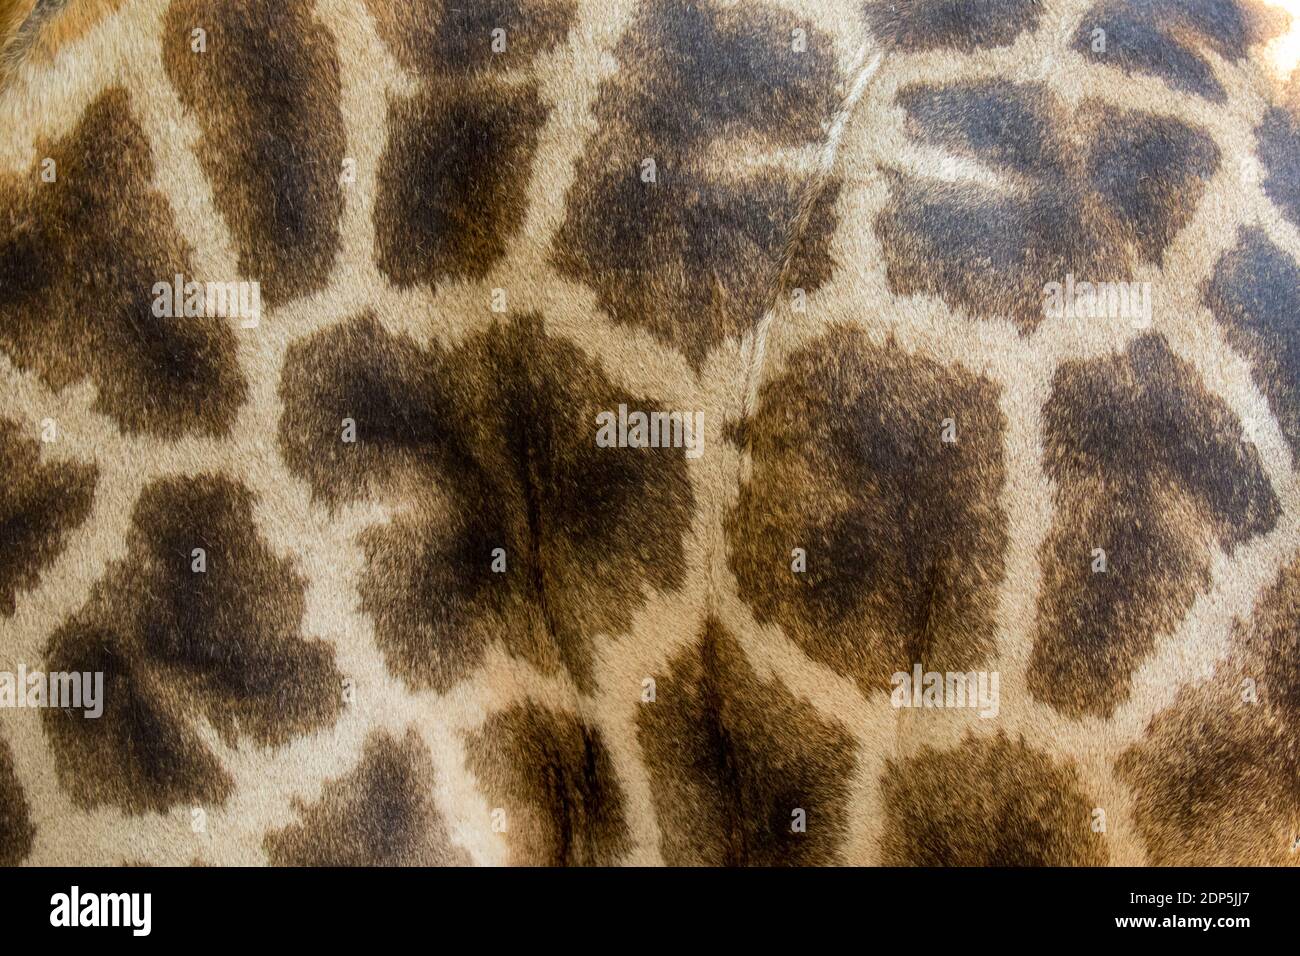 Genuine leather skin of giraffe with light and dark brown spots. Stock Photo